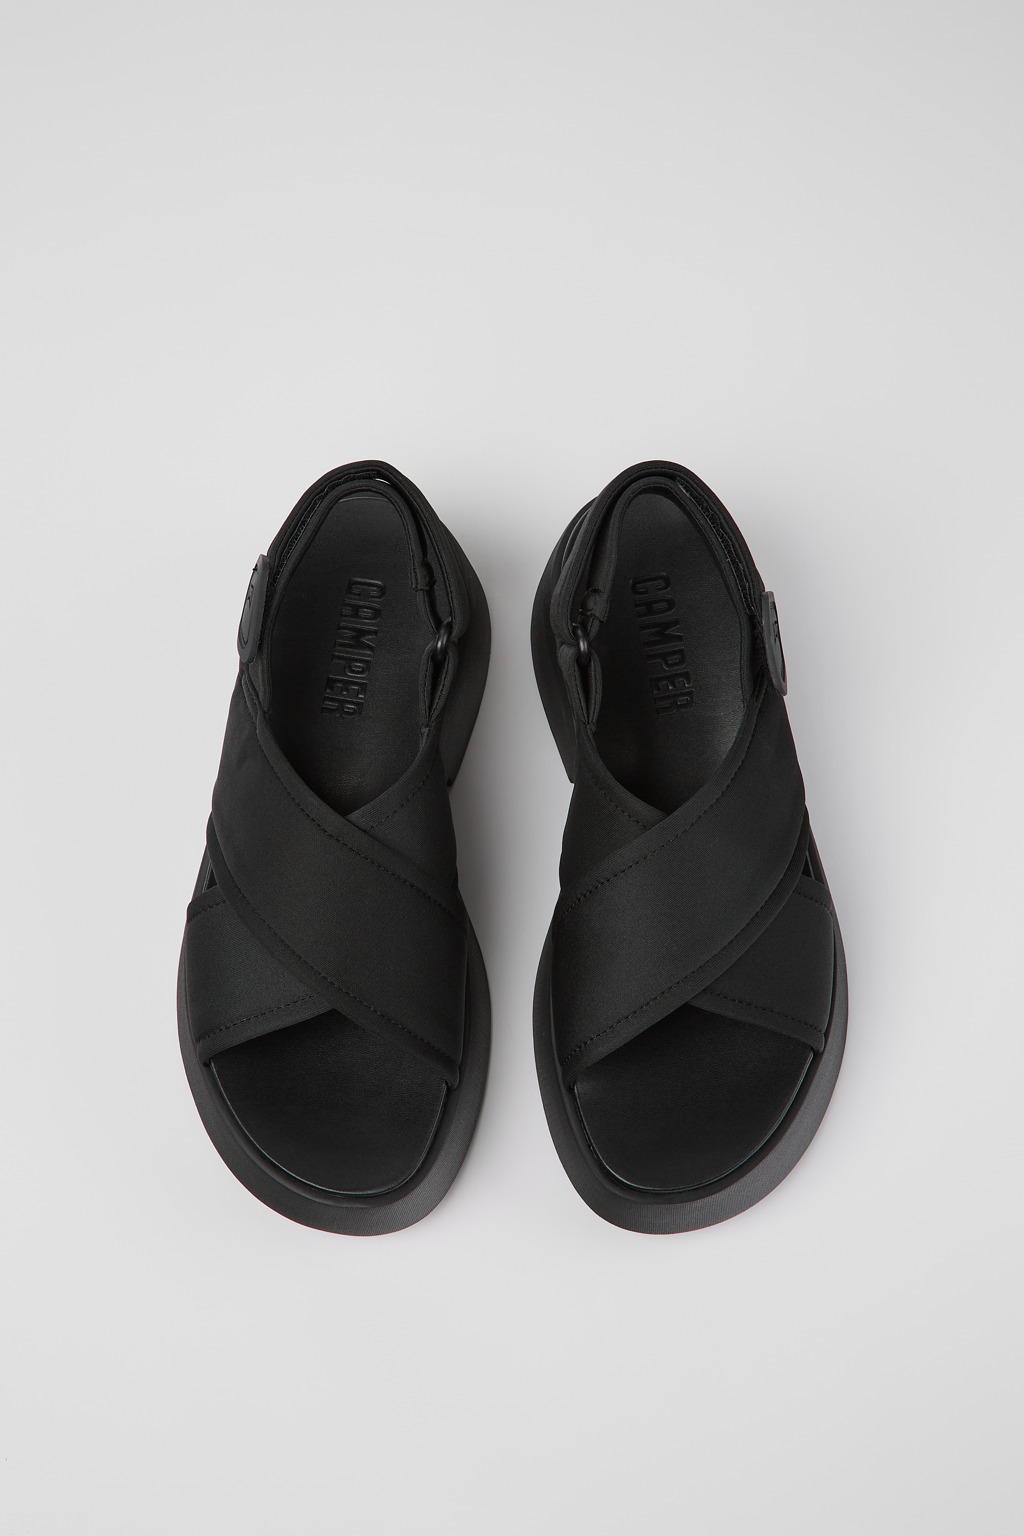 Black Sandals for Women - Fall/Winter collection - Camper USA